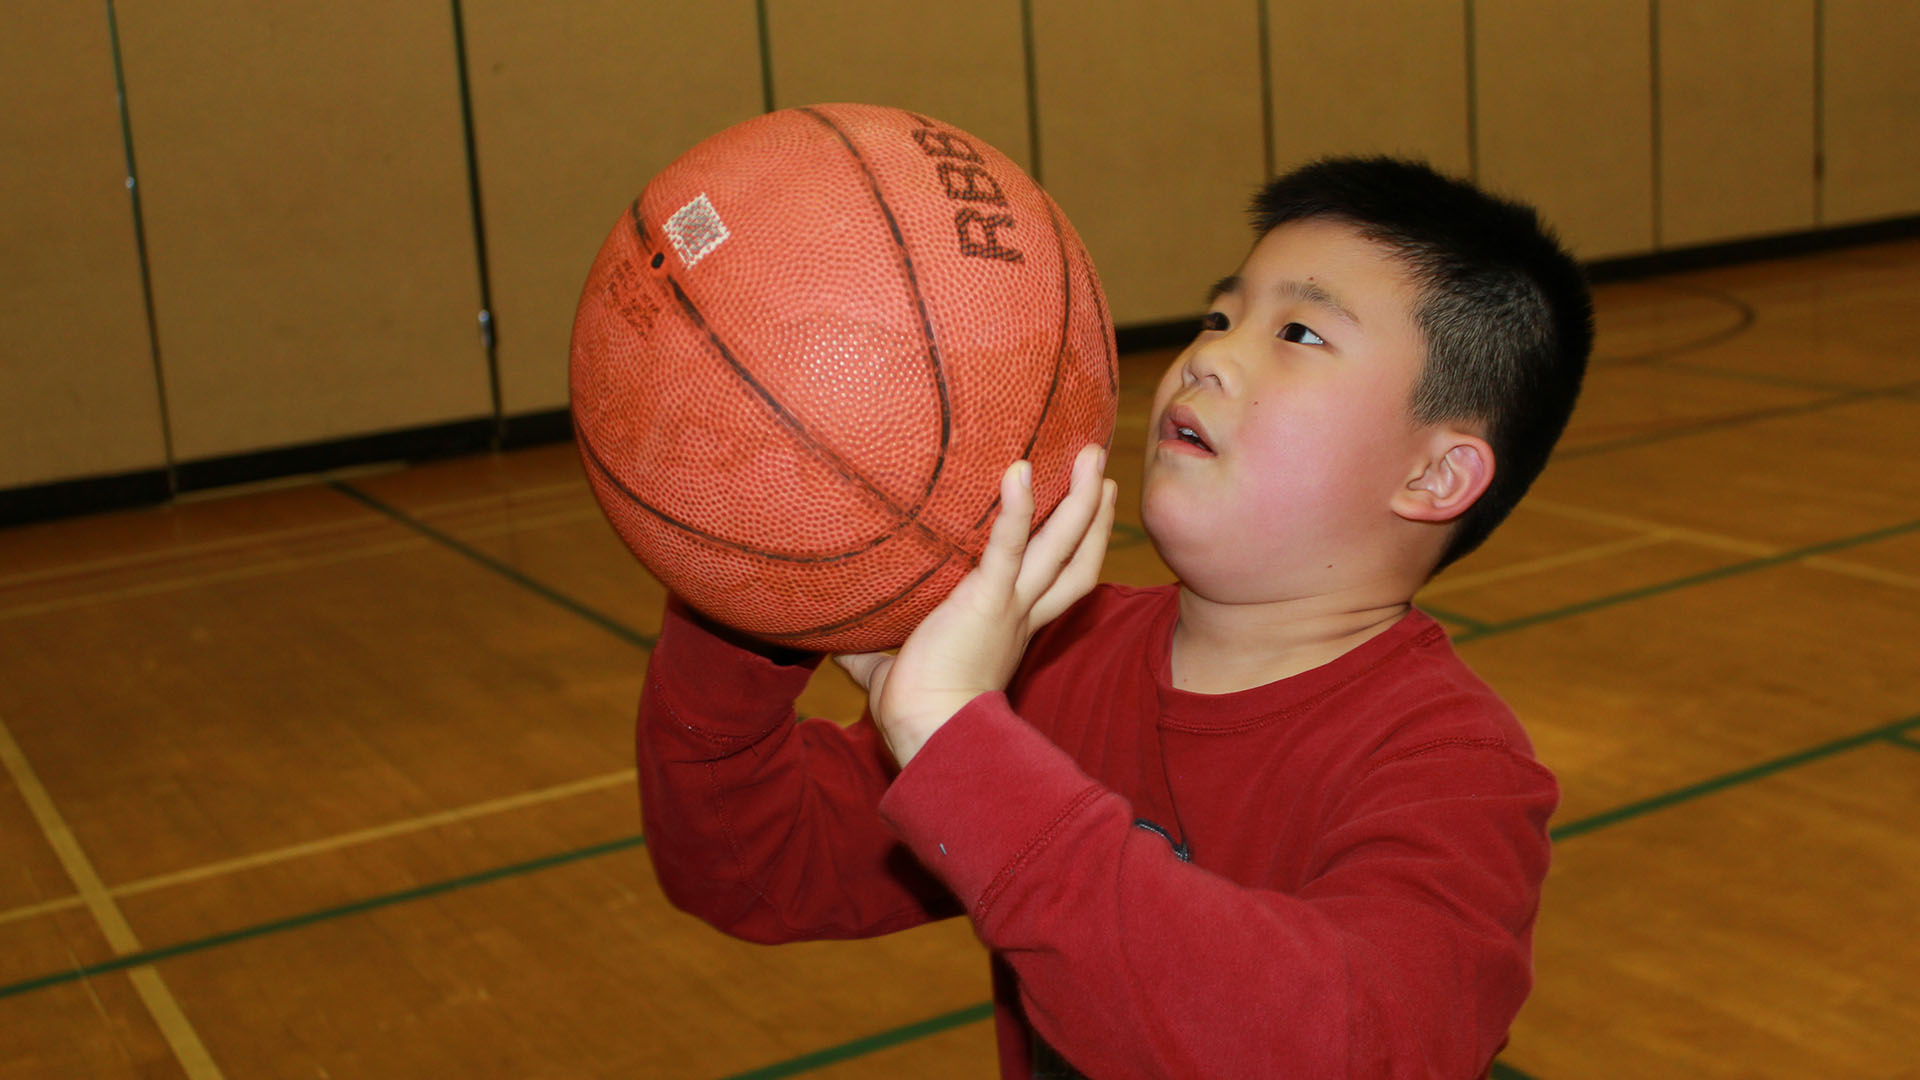 A young boy holds a basketball close to his face as he aims to throw it